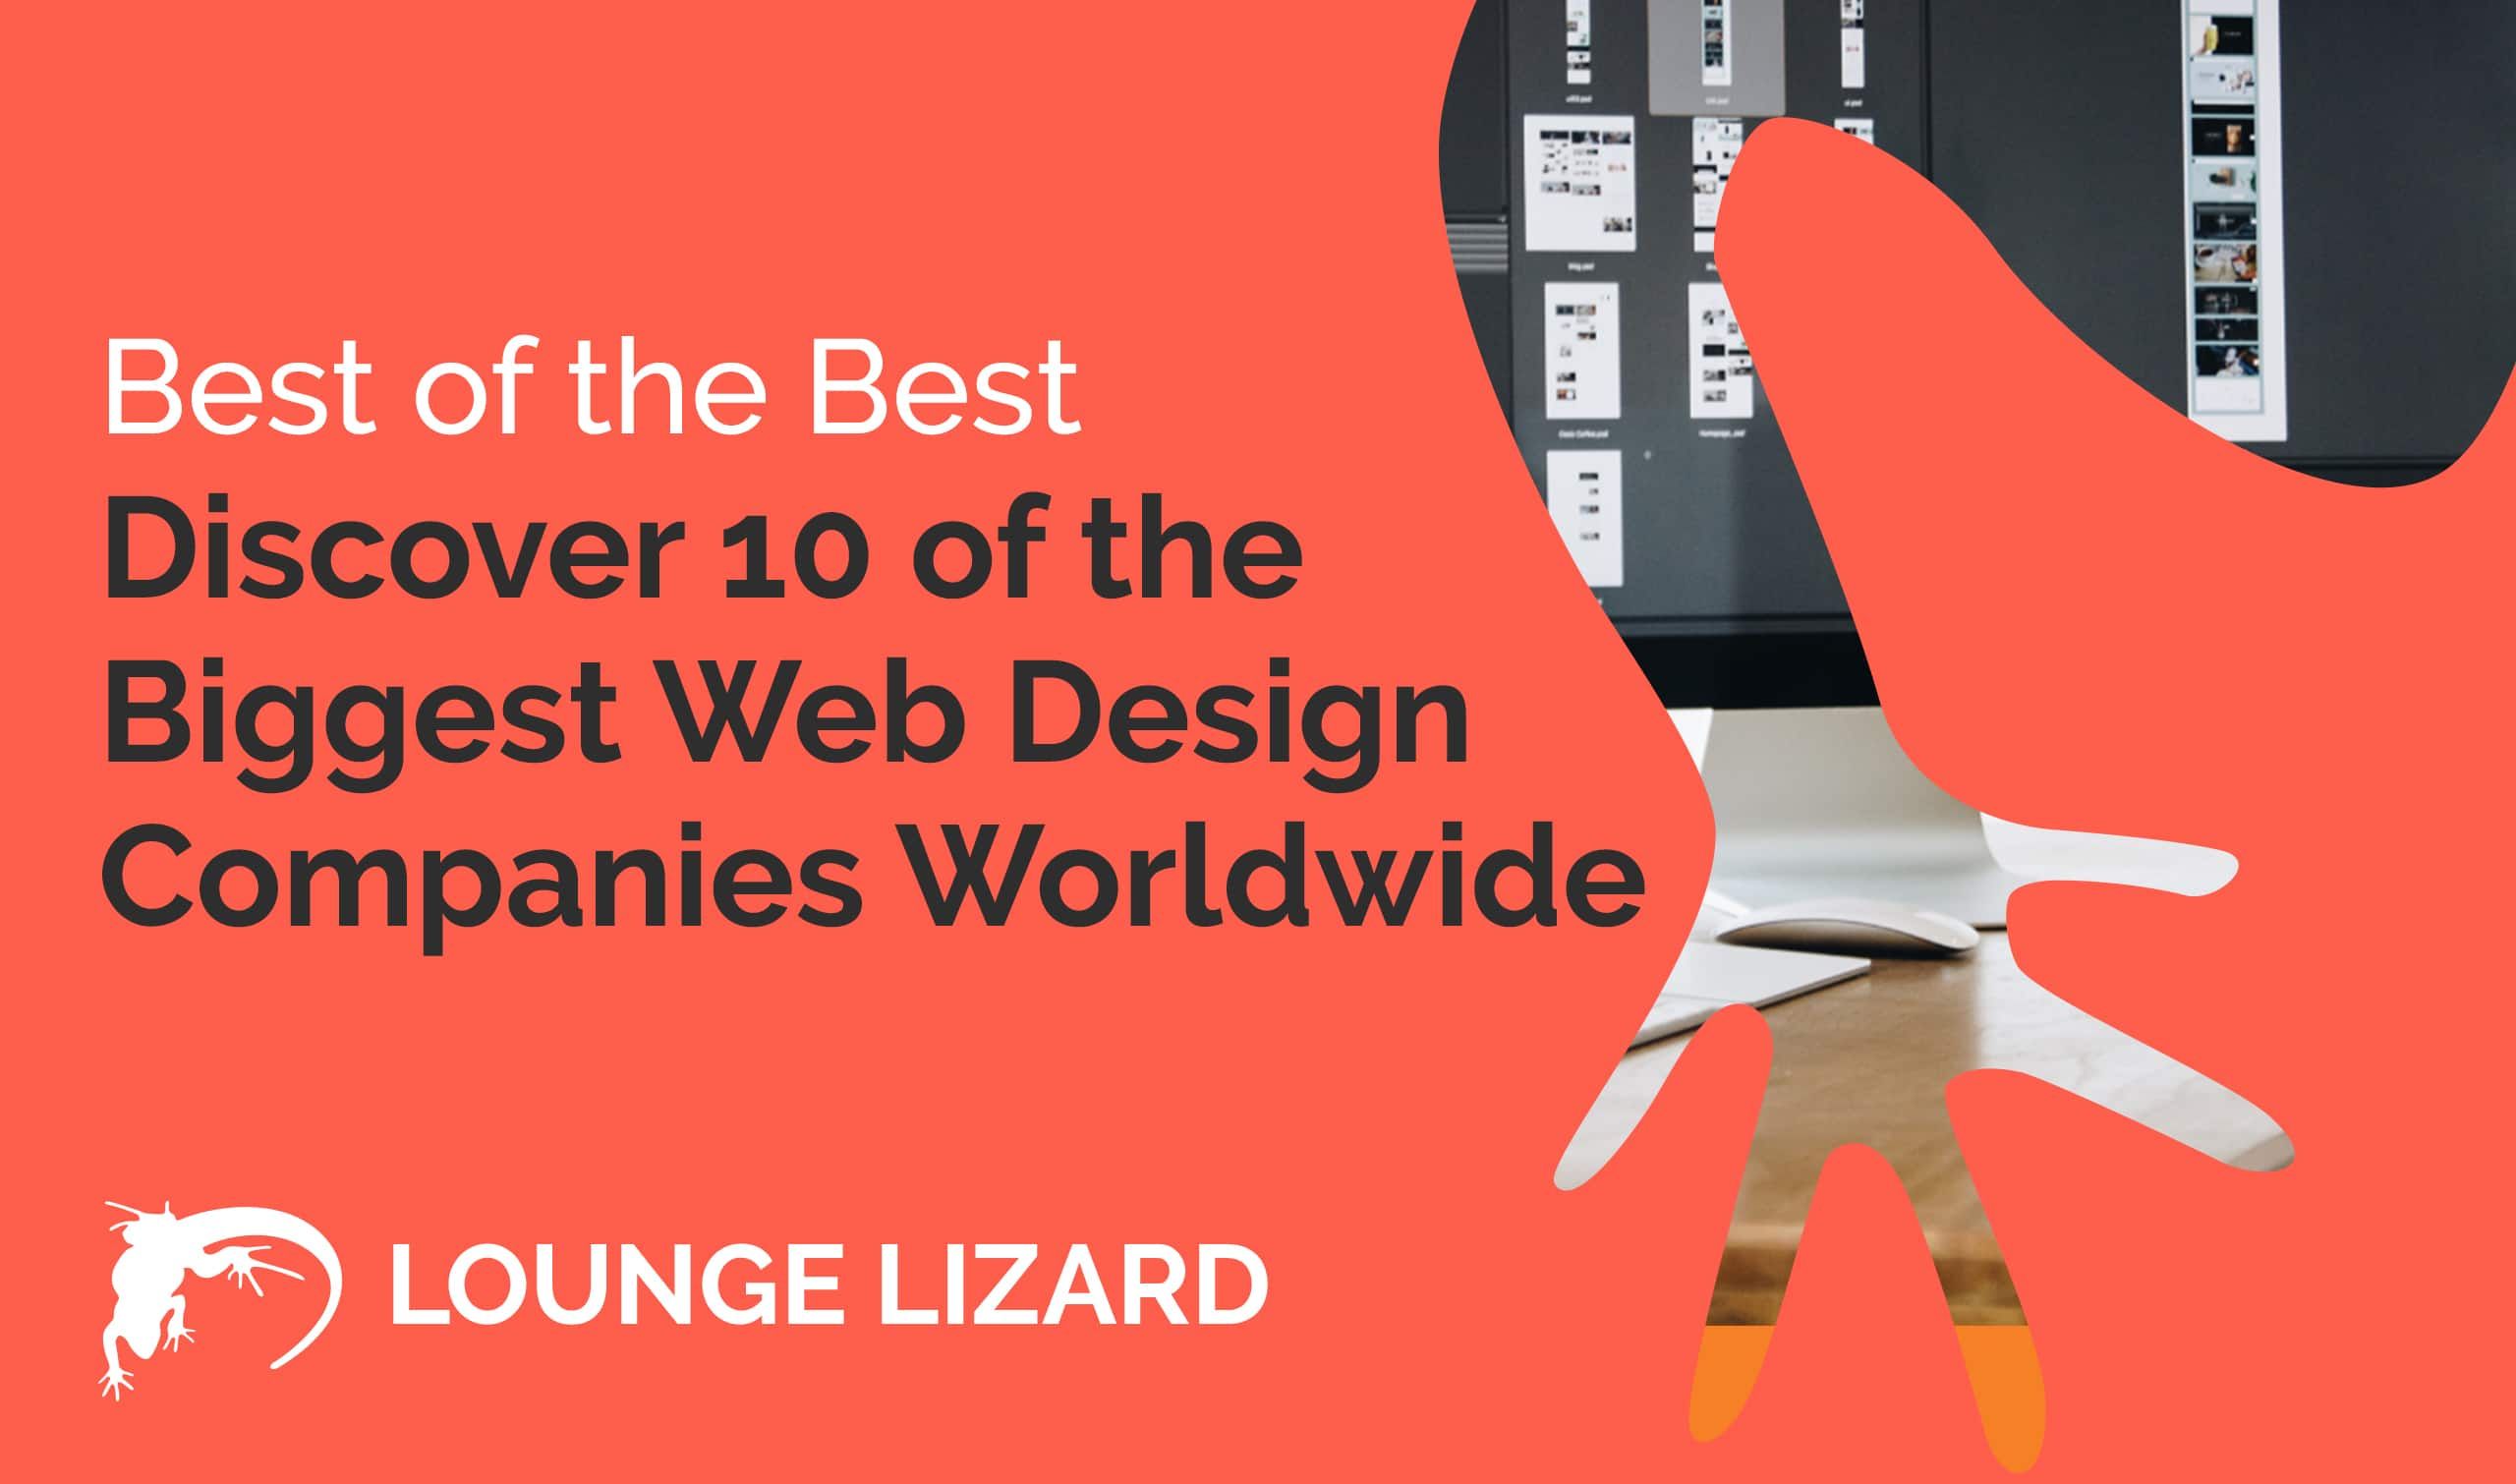 Where Will Top 10 Web Designing Companies Be 6 Months From Now?